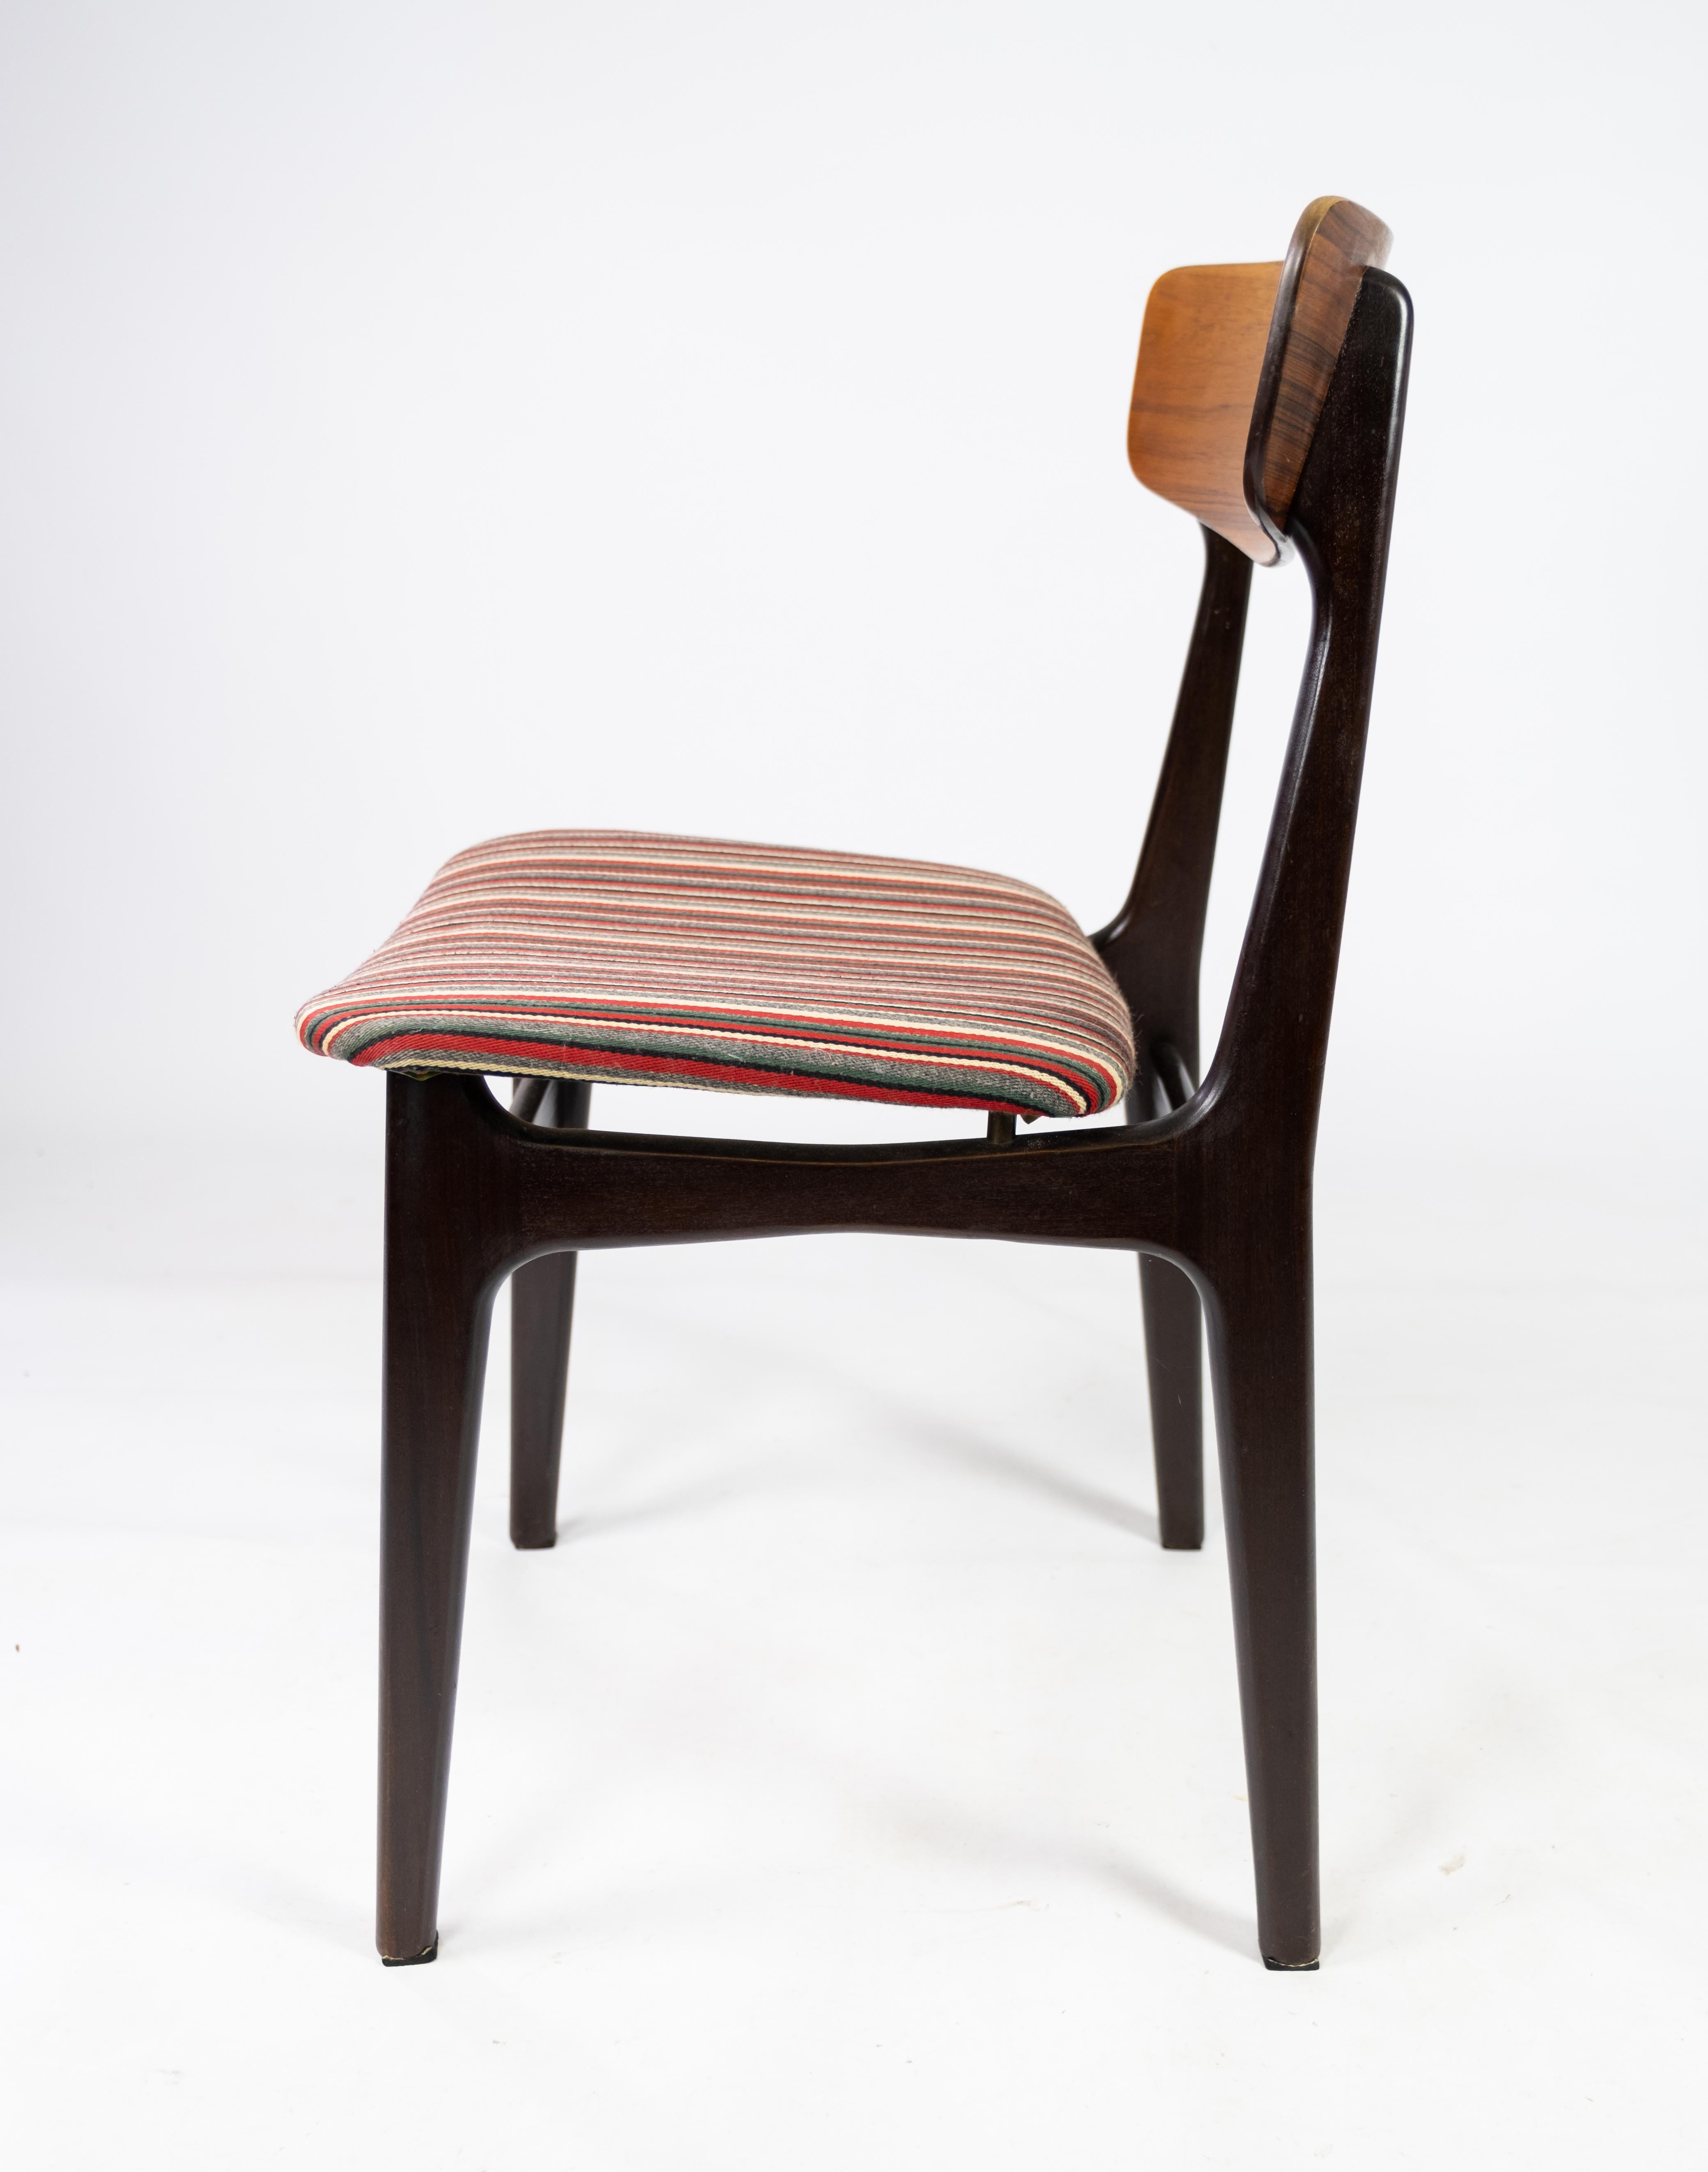 Mid-20th Century Dining Room Chair in Rosewood of Danish Design, 1960s For Sale